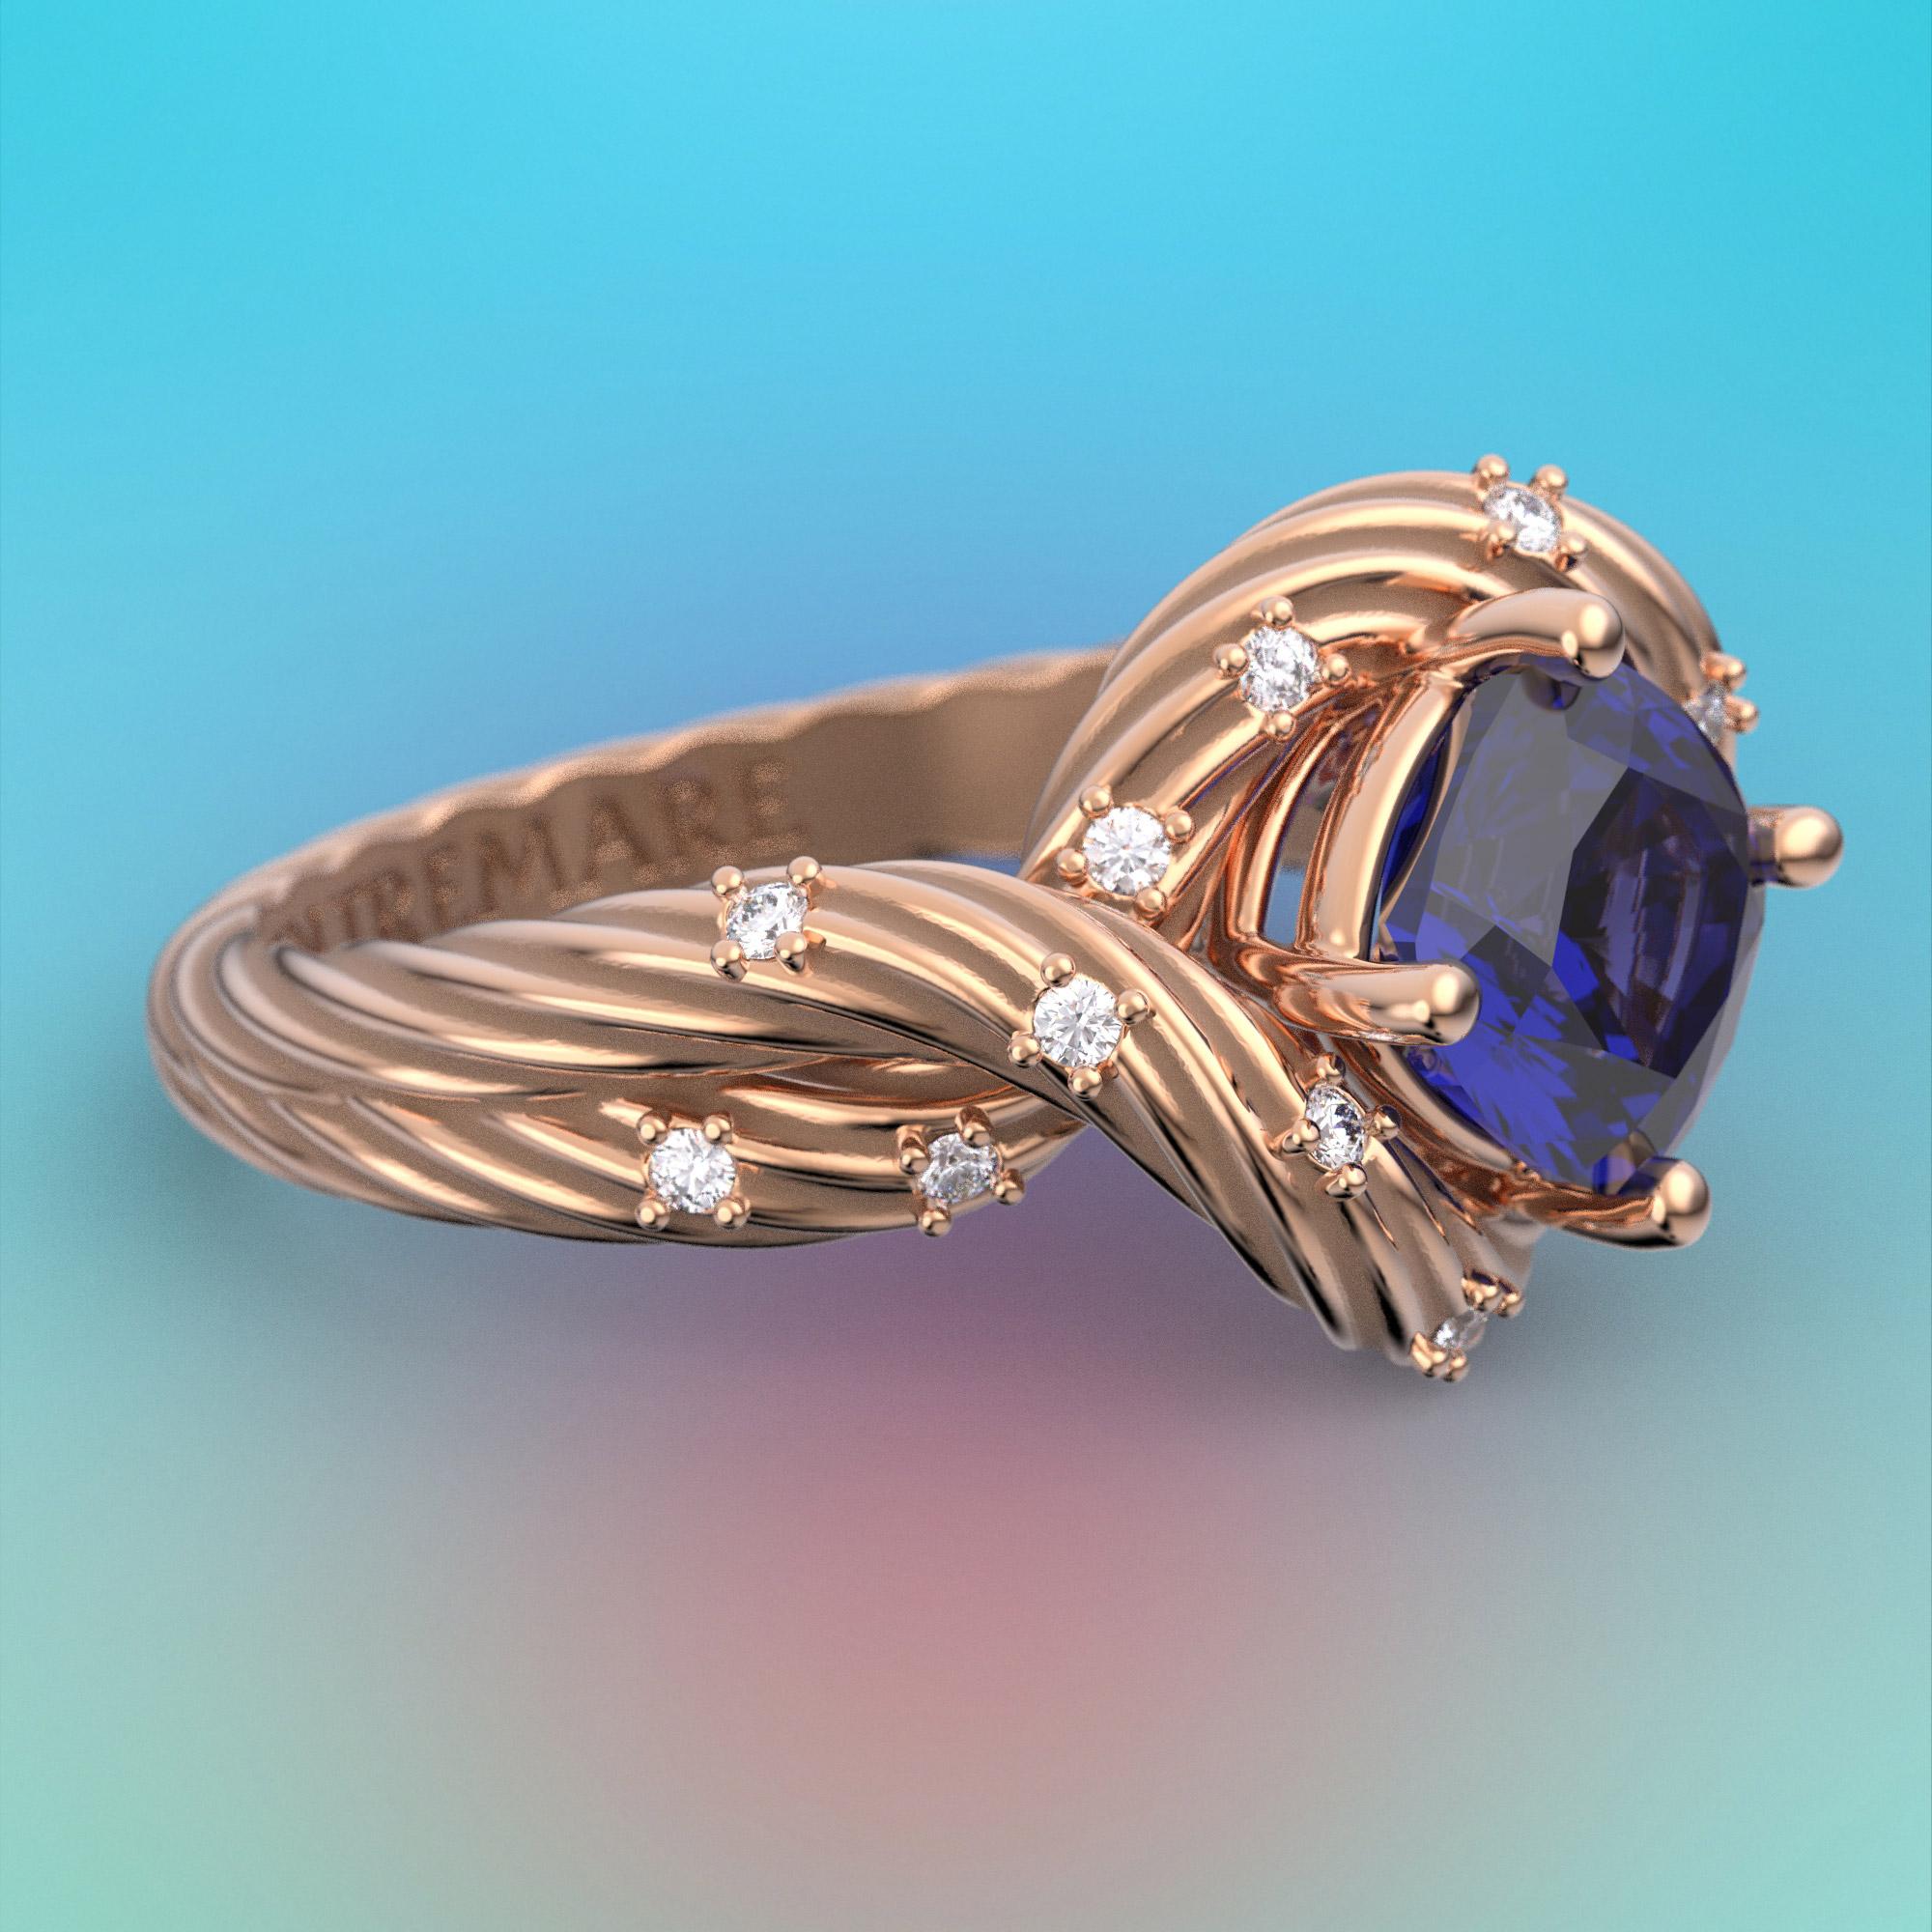 For Sale:  Tanzanite and Diamonds Ring 14k Solid Gold, Italian Fine Jewelry, made to order. 16